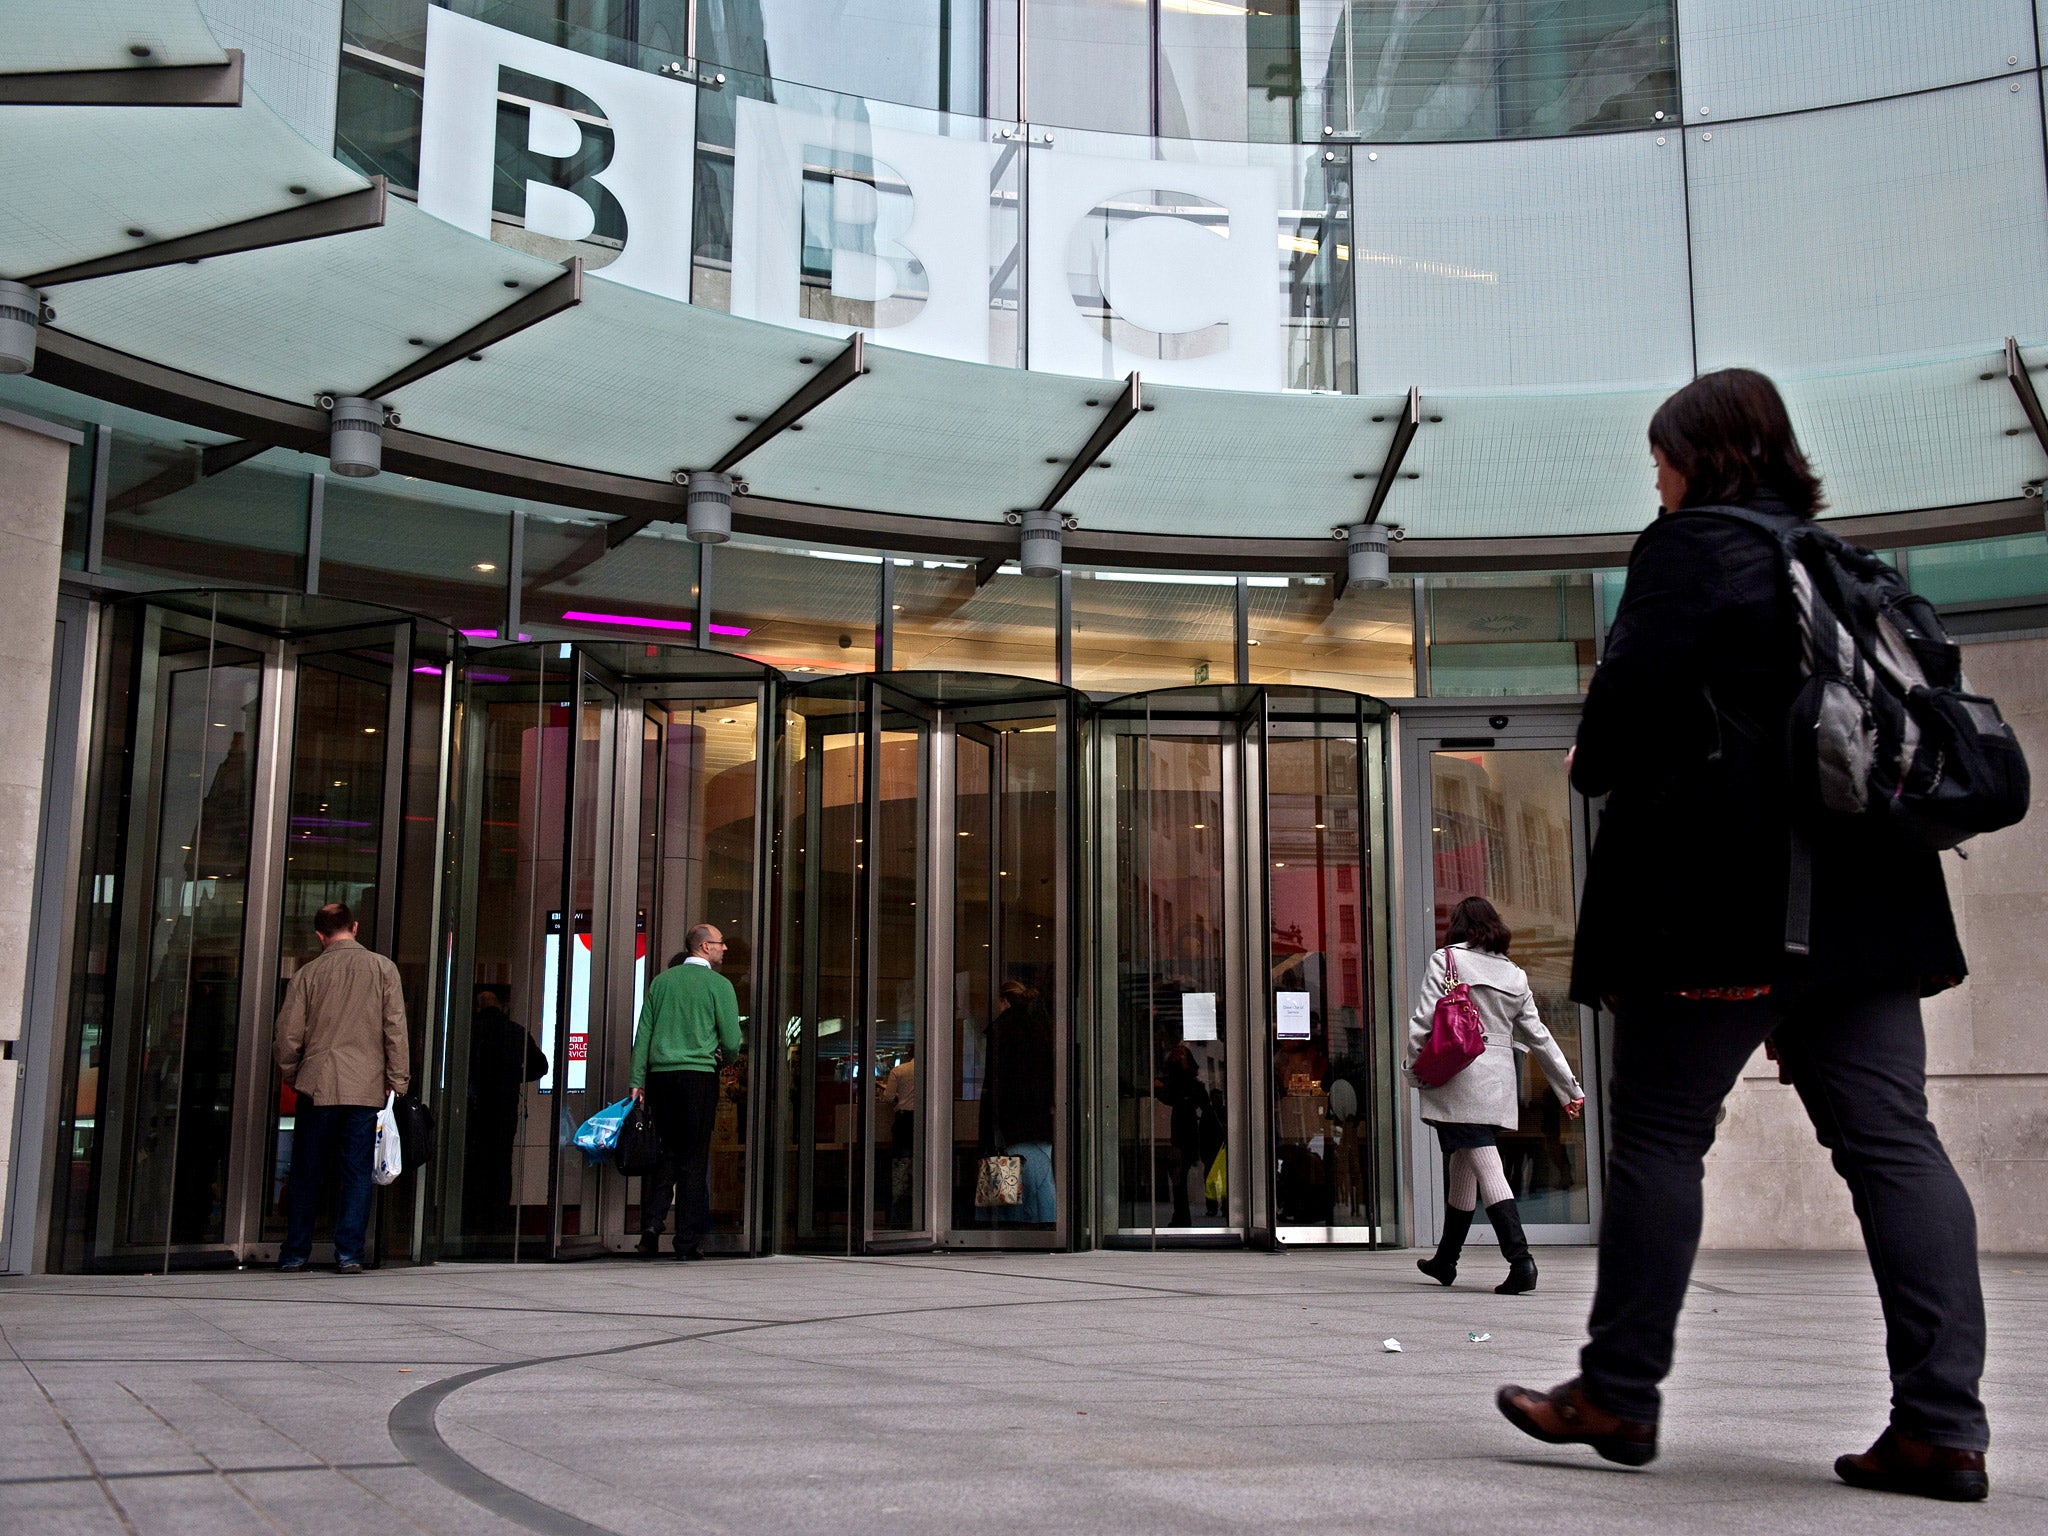 850 members of BBC staff came forward to raise their concerns